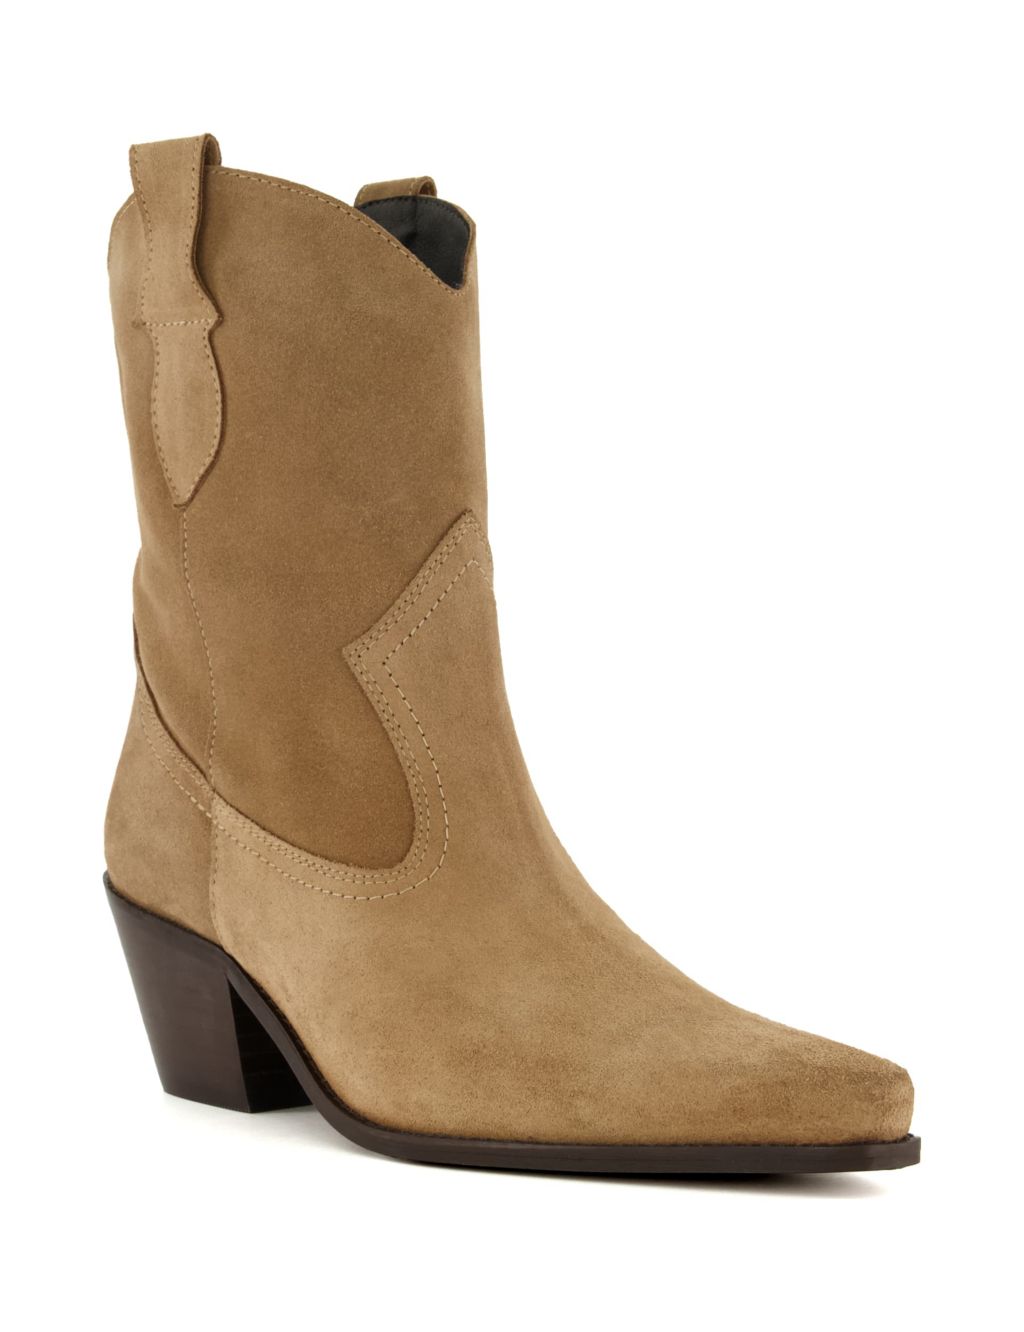 Suede Pull On Western Boots image 2